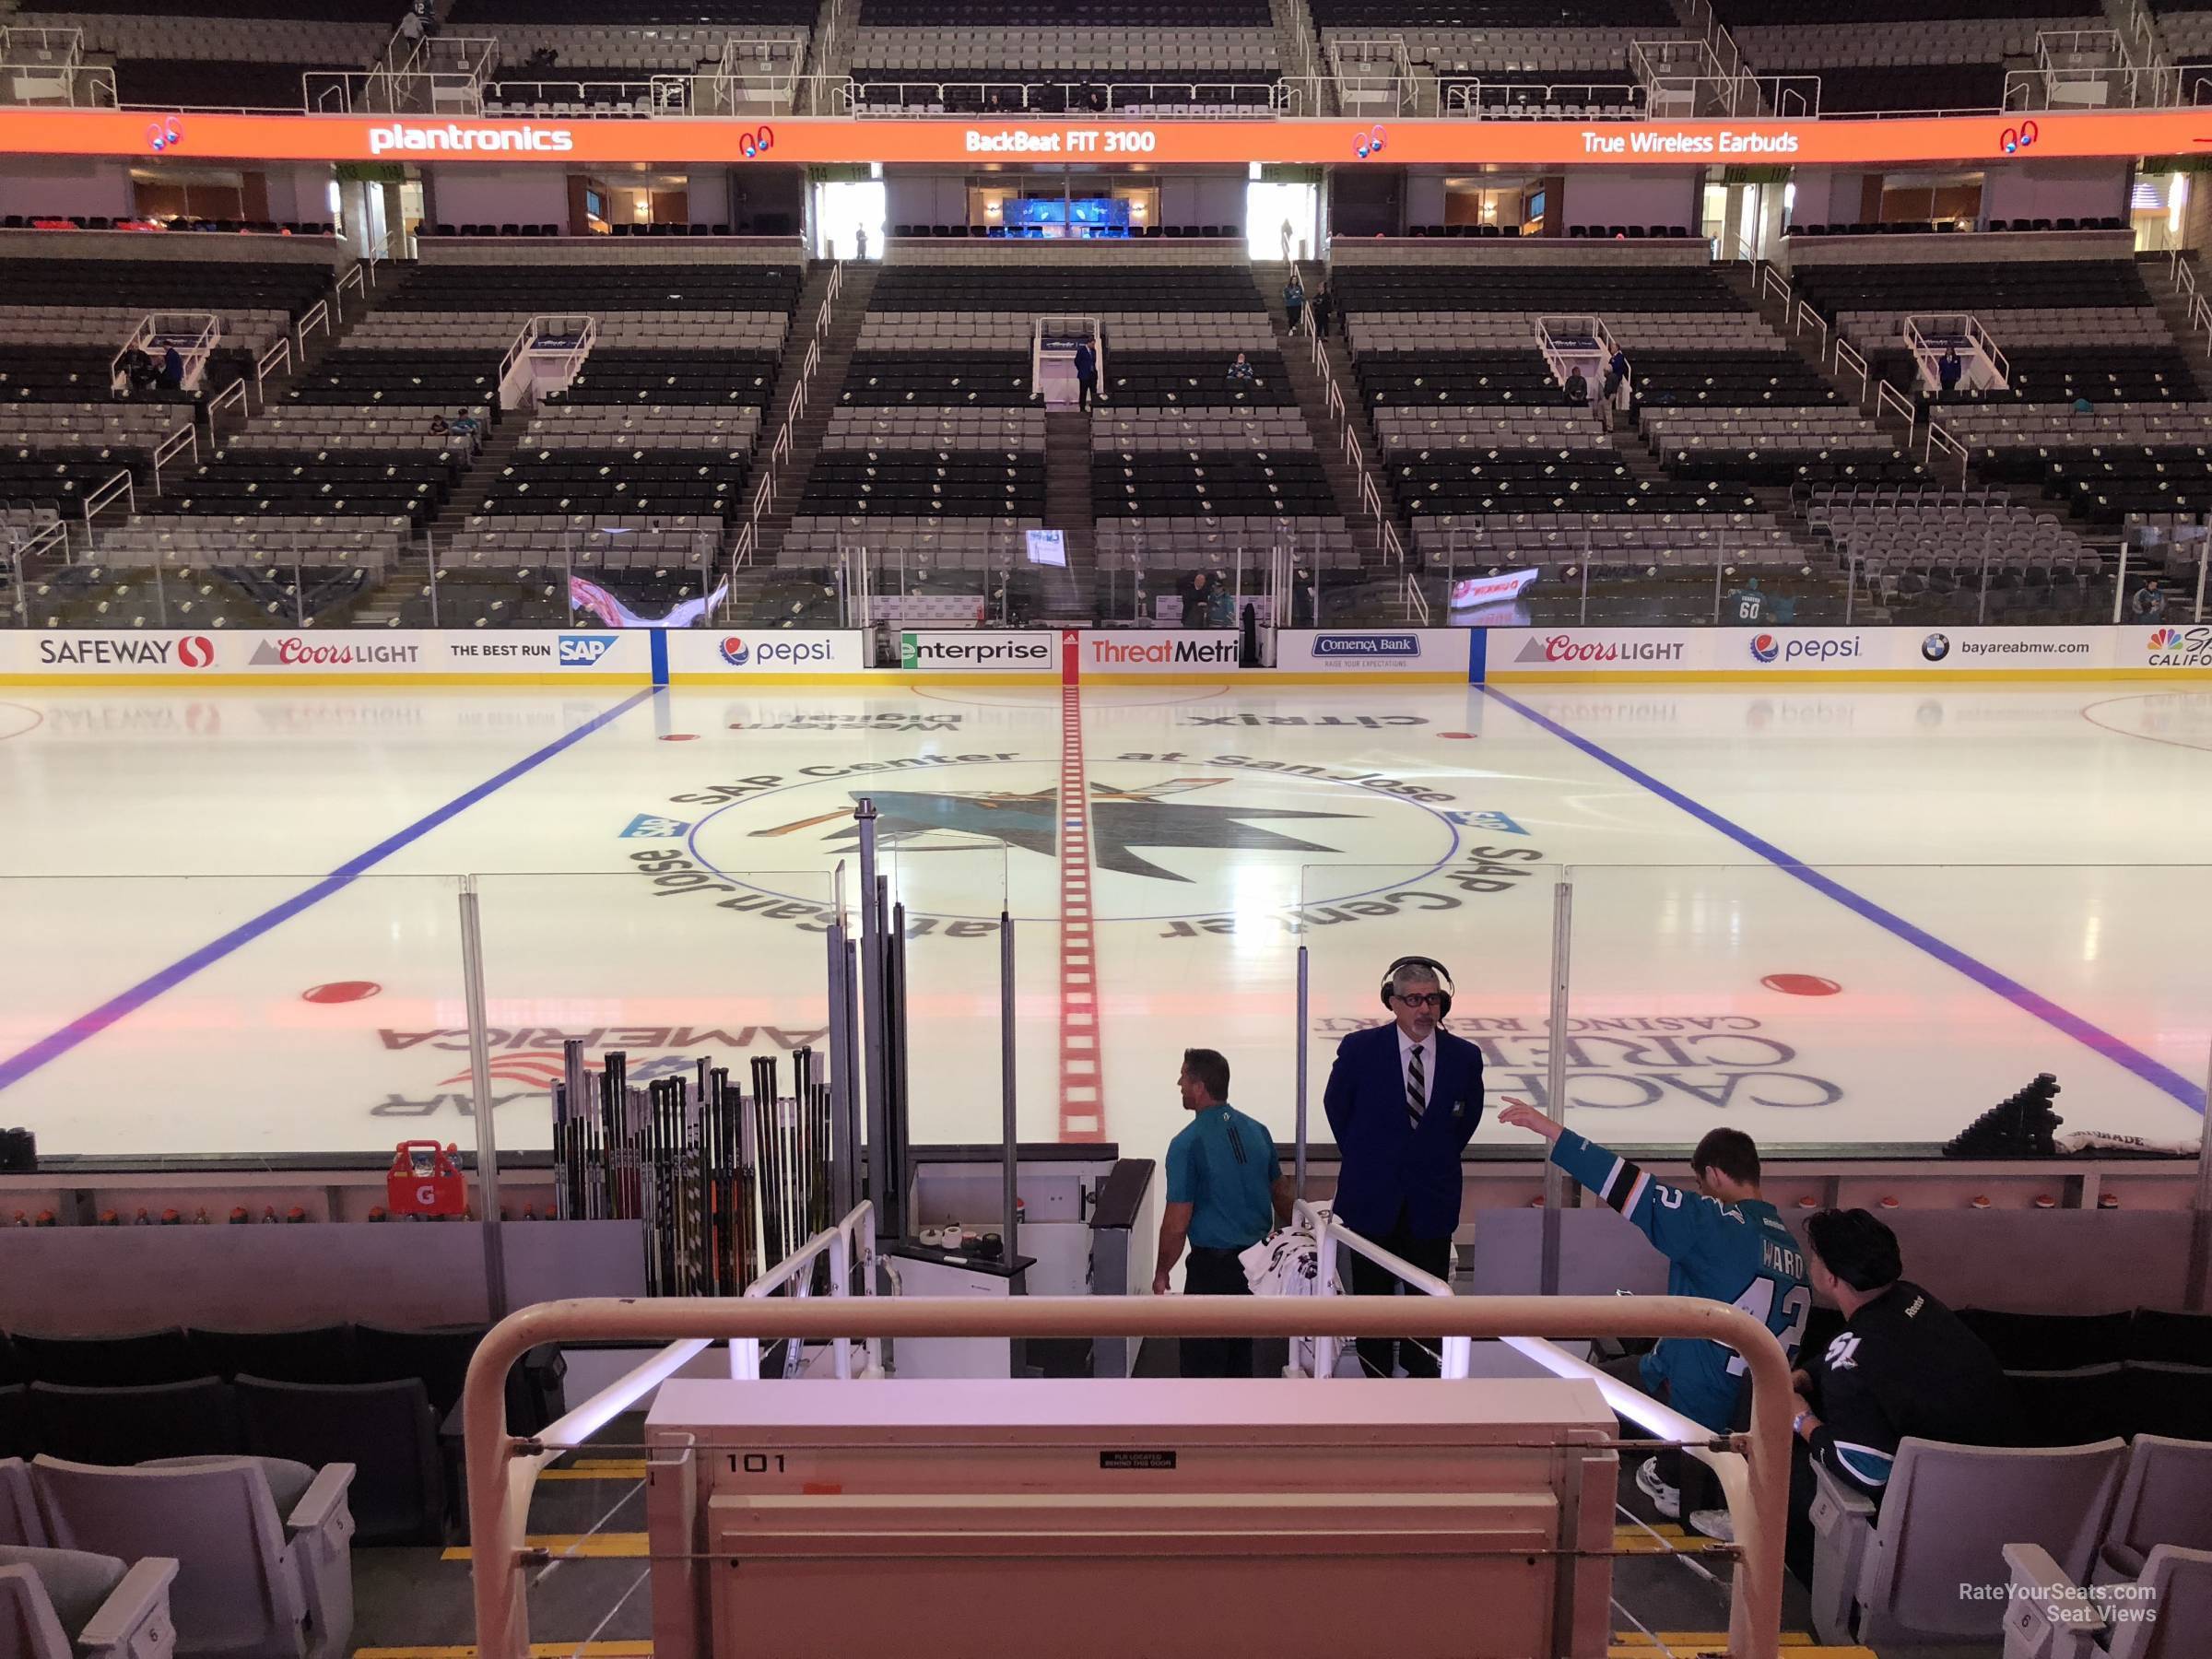 section 101, row 10 seat view  for hockey - sap center